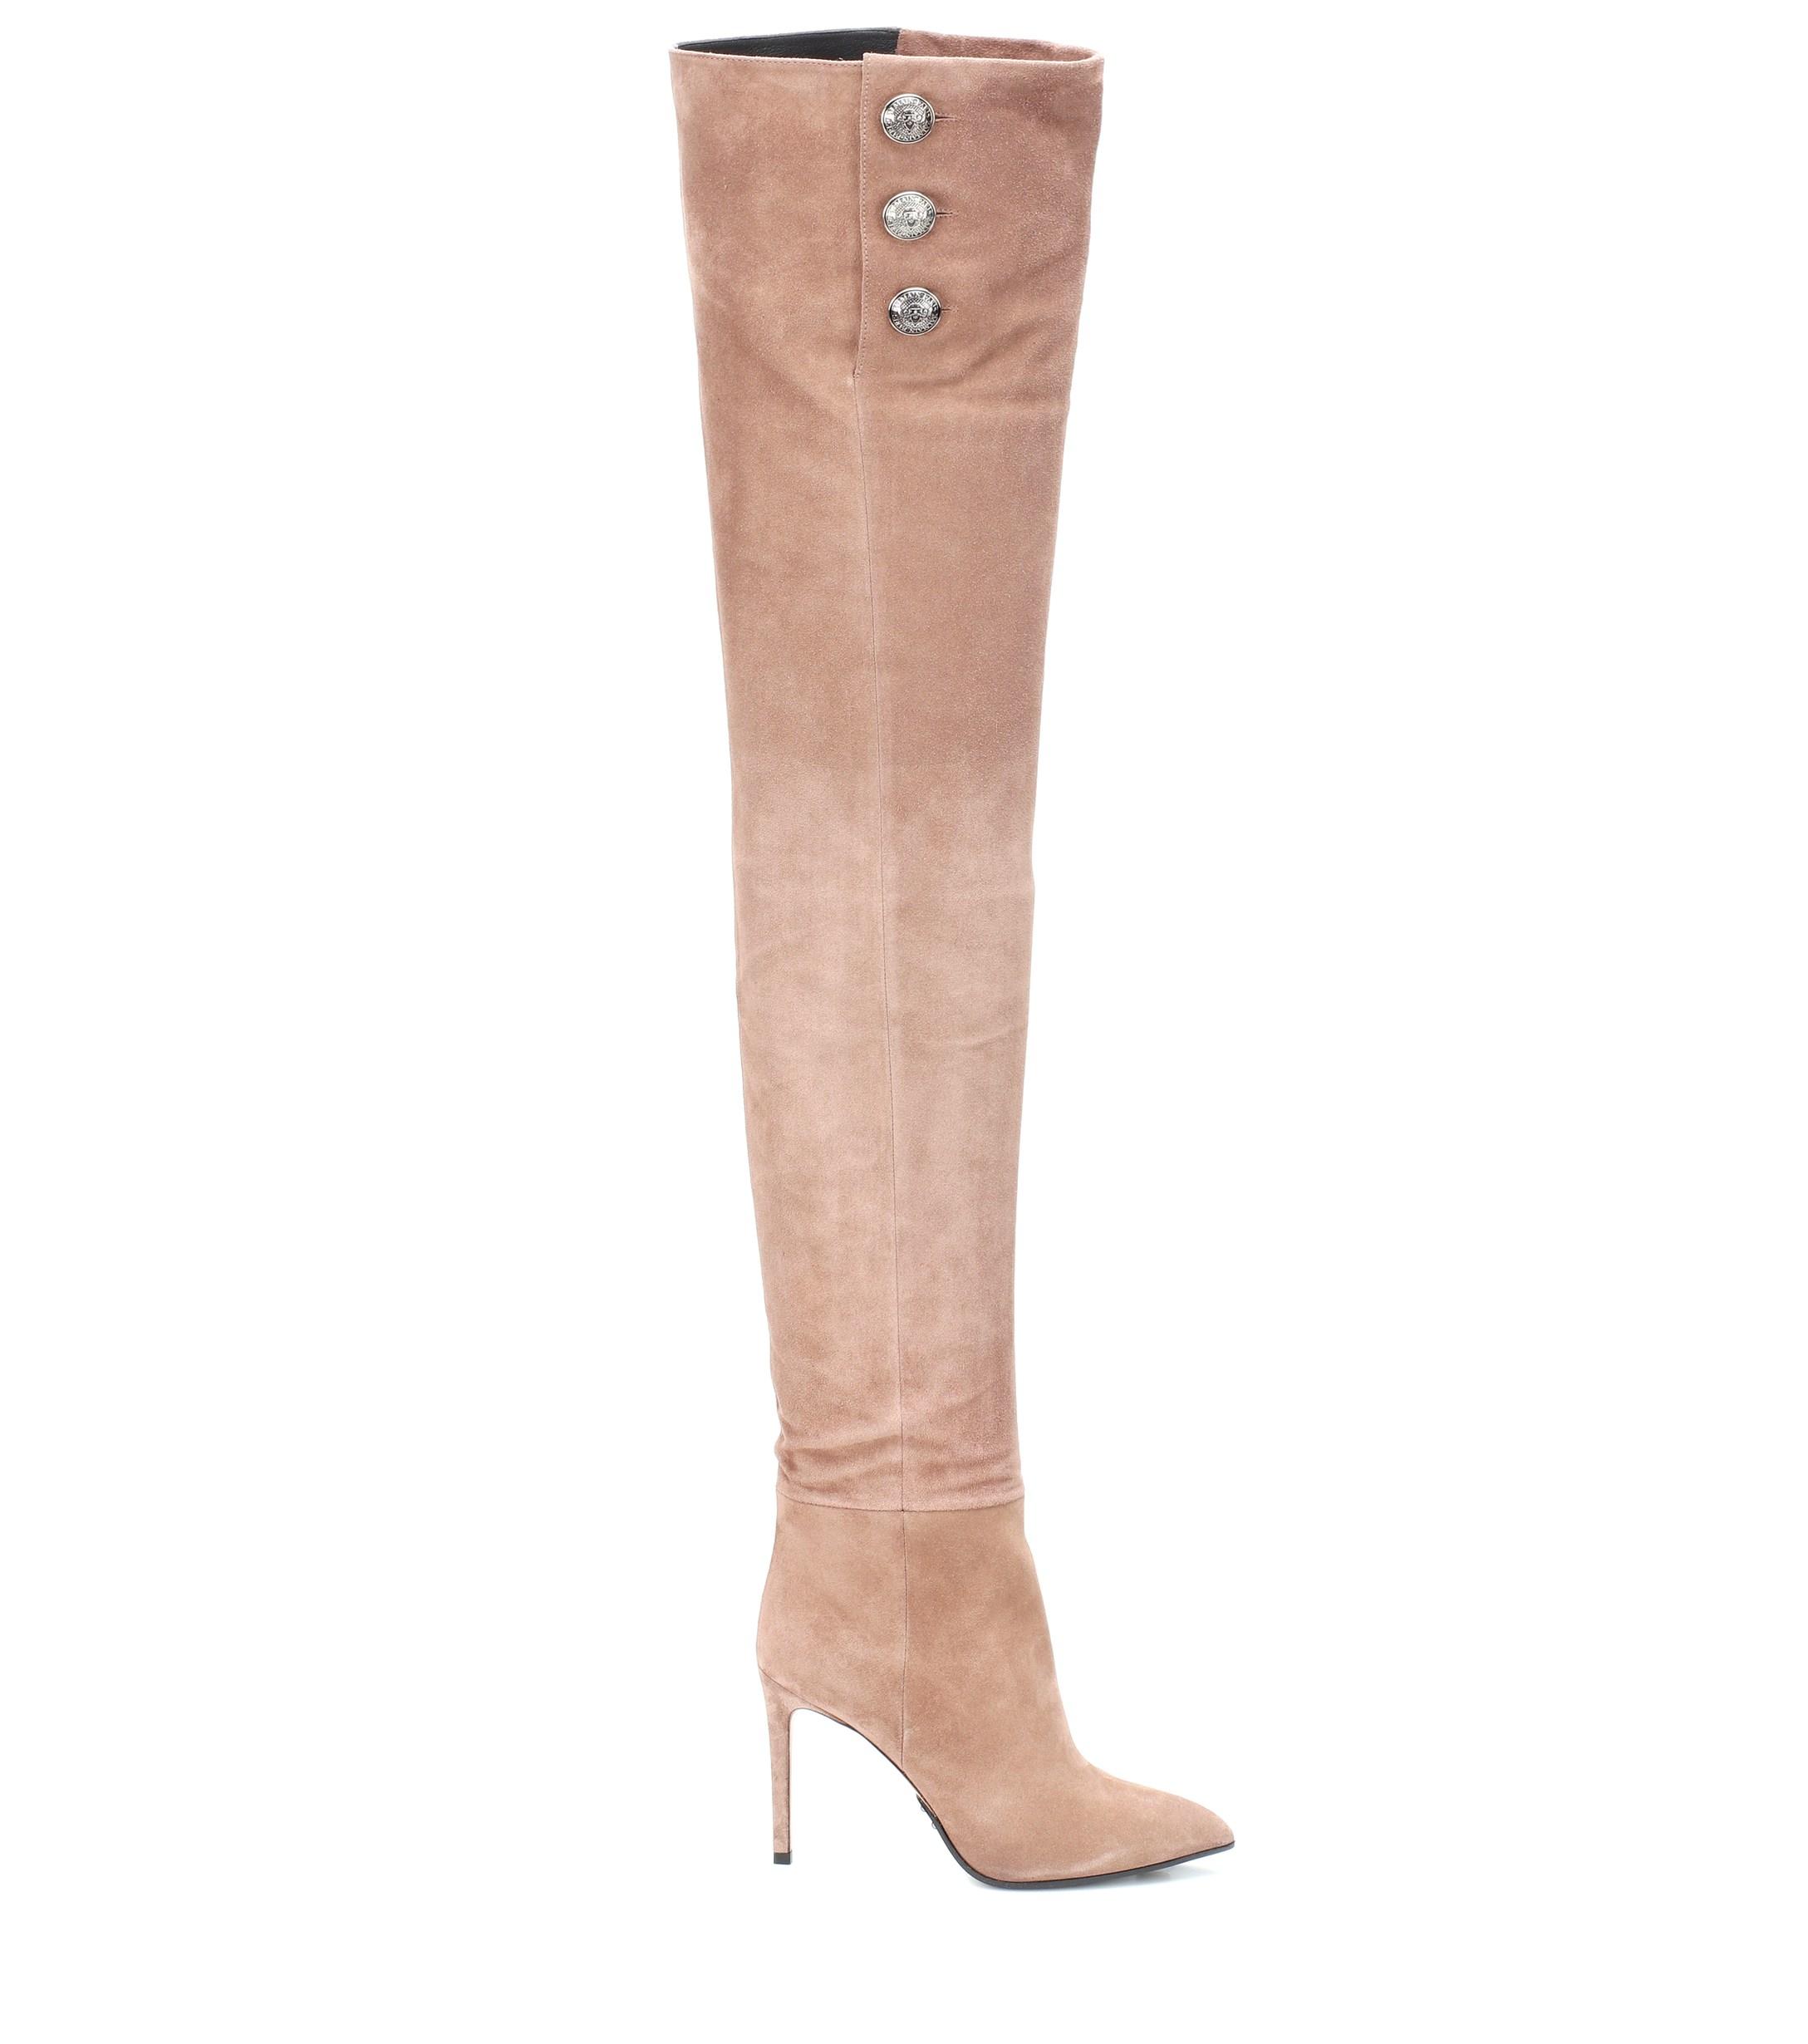 Balmain Suede Over-the-knee Boots in Beige (Natural) | Lyst